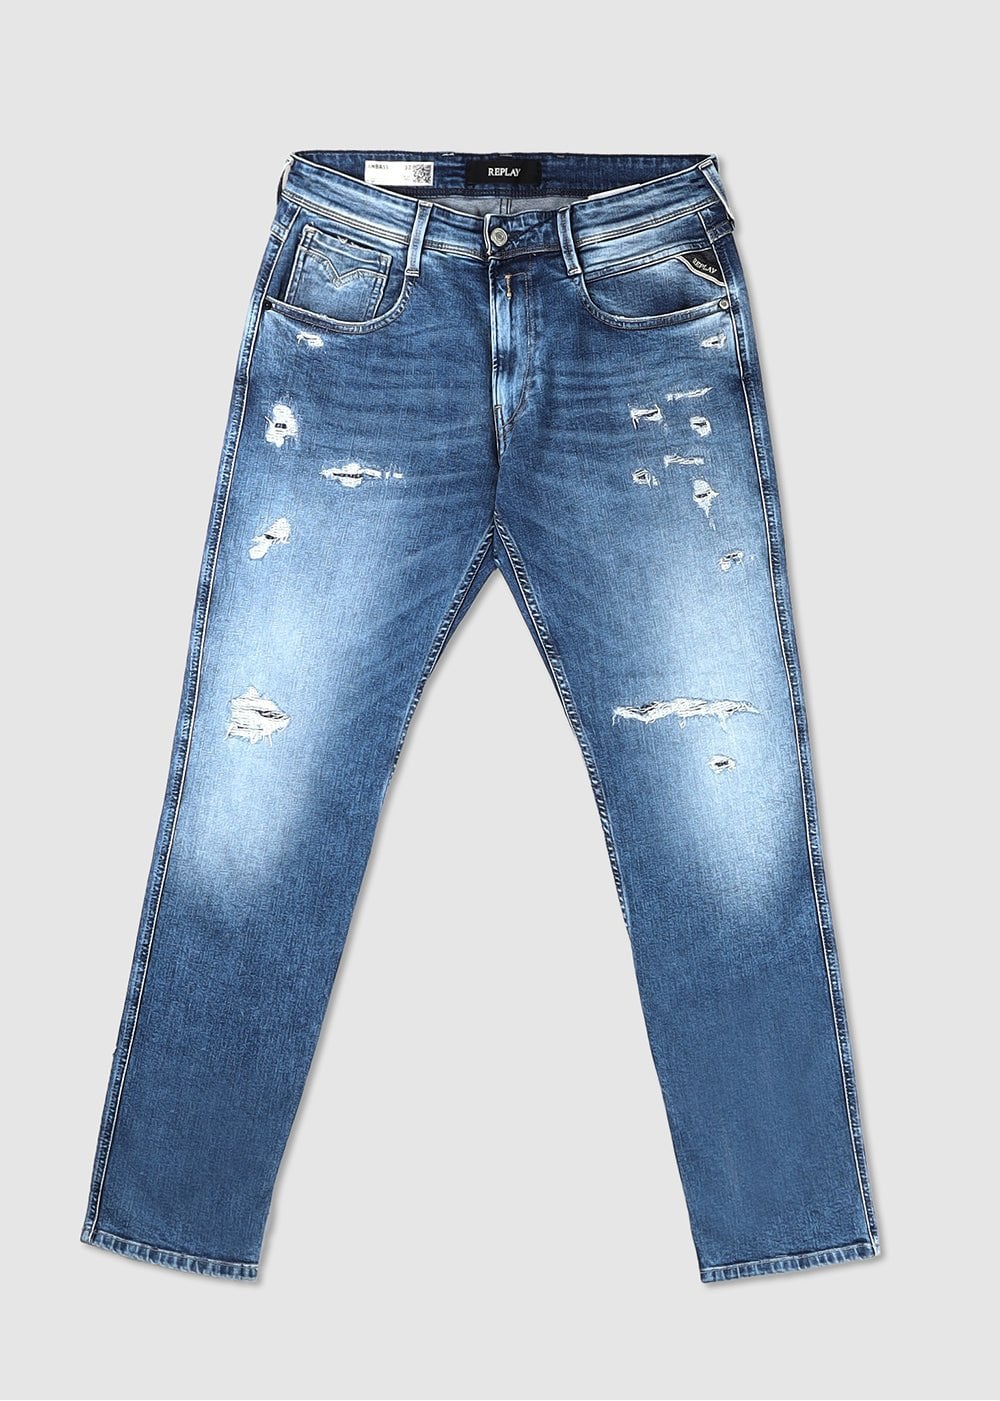 Replay Mens Anbass 573 Bio Jeans In Blue